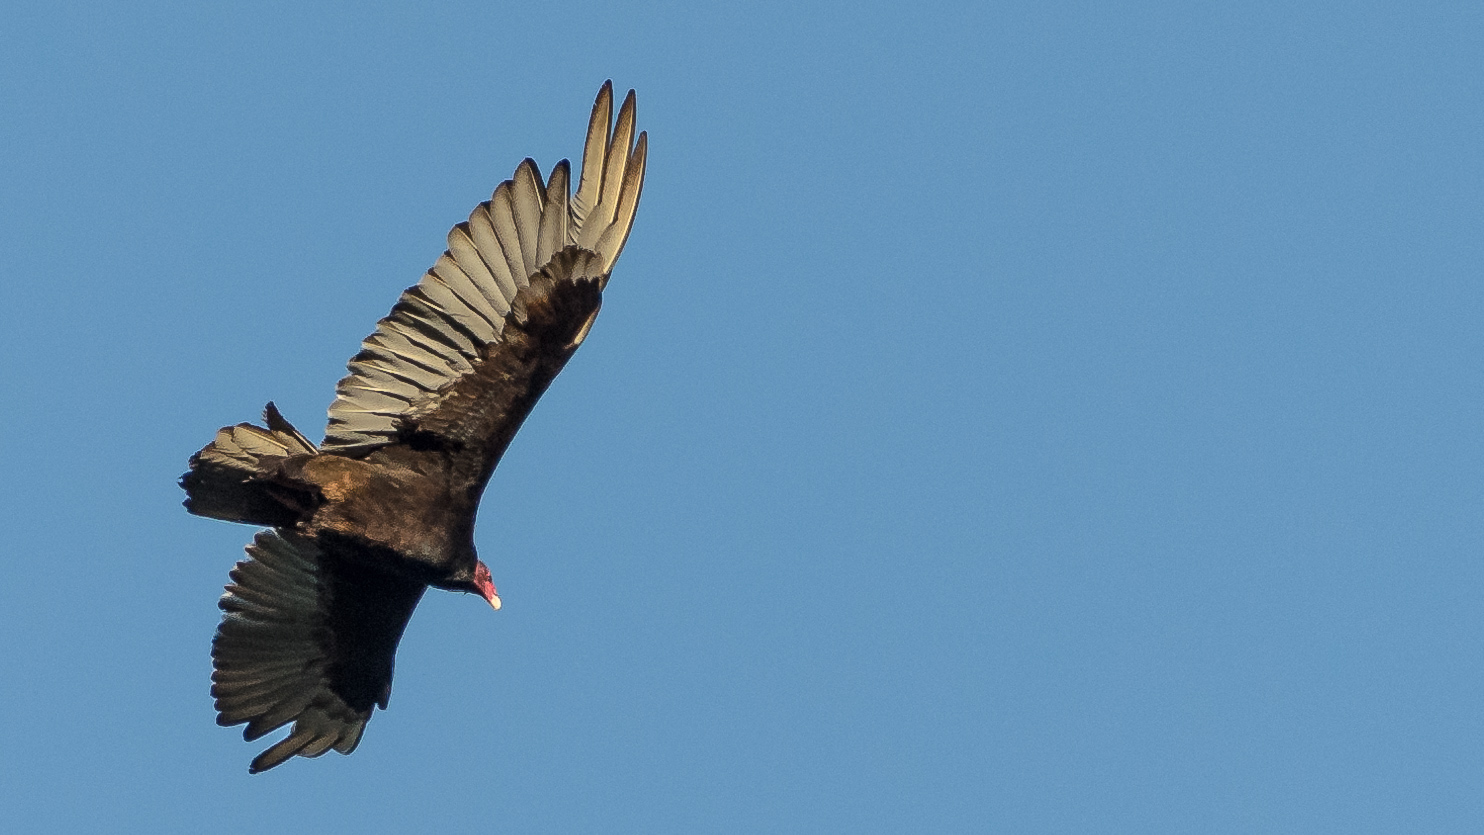 A turkey vulture shot close to the Golden Gate Bridge in San Francisco with a Nikon D7000